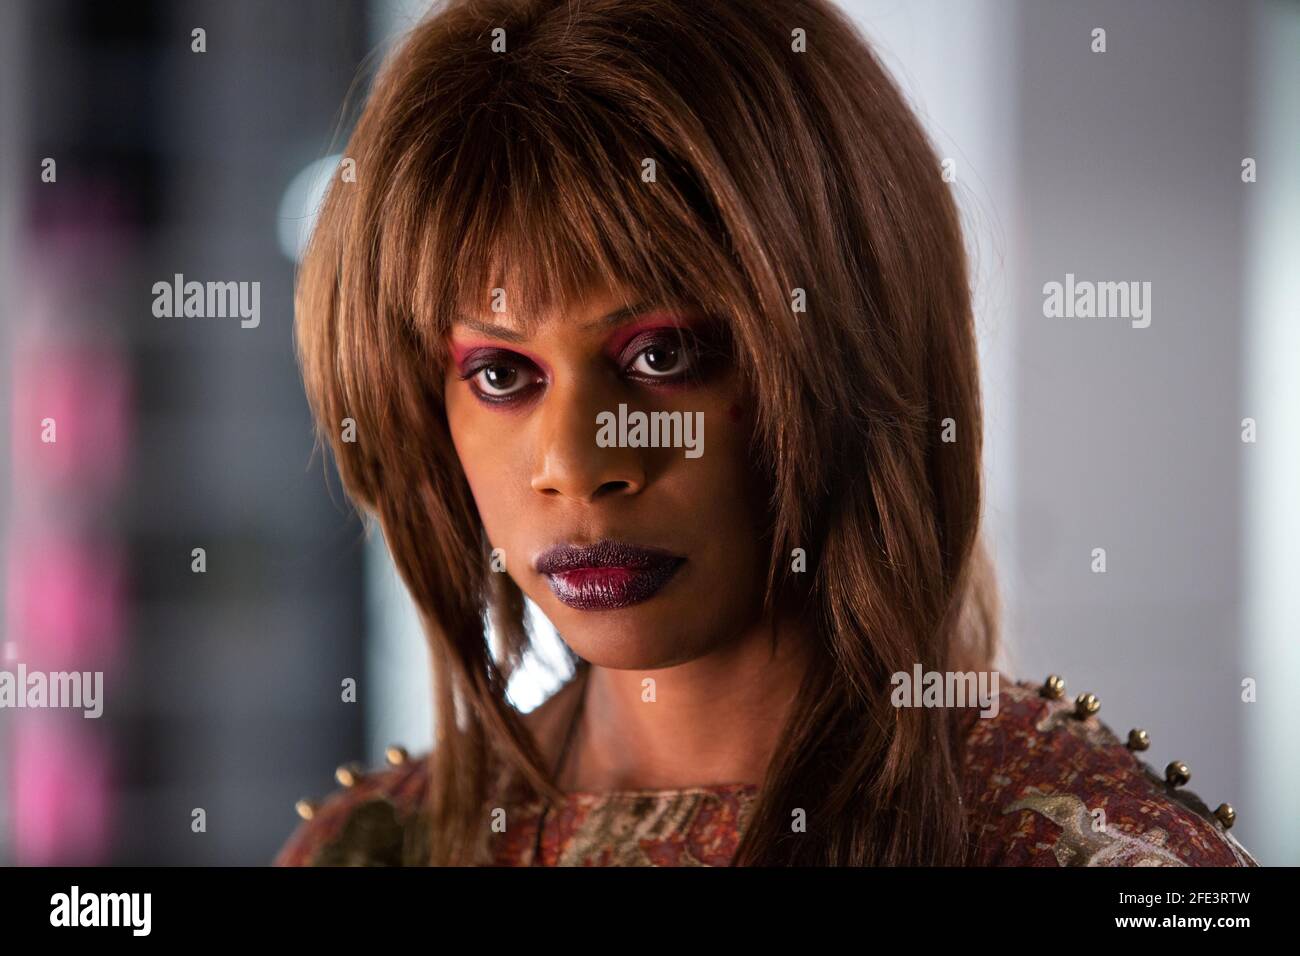 LAVERNE COX in BAD HAIR (2020), directed by JUSTIN SIMIEN. Credit: Culture Machine / Sight Unseen Pictures / Album Stock Photo